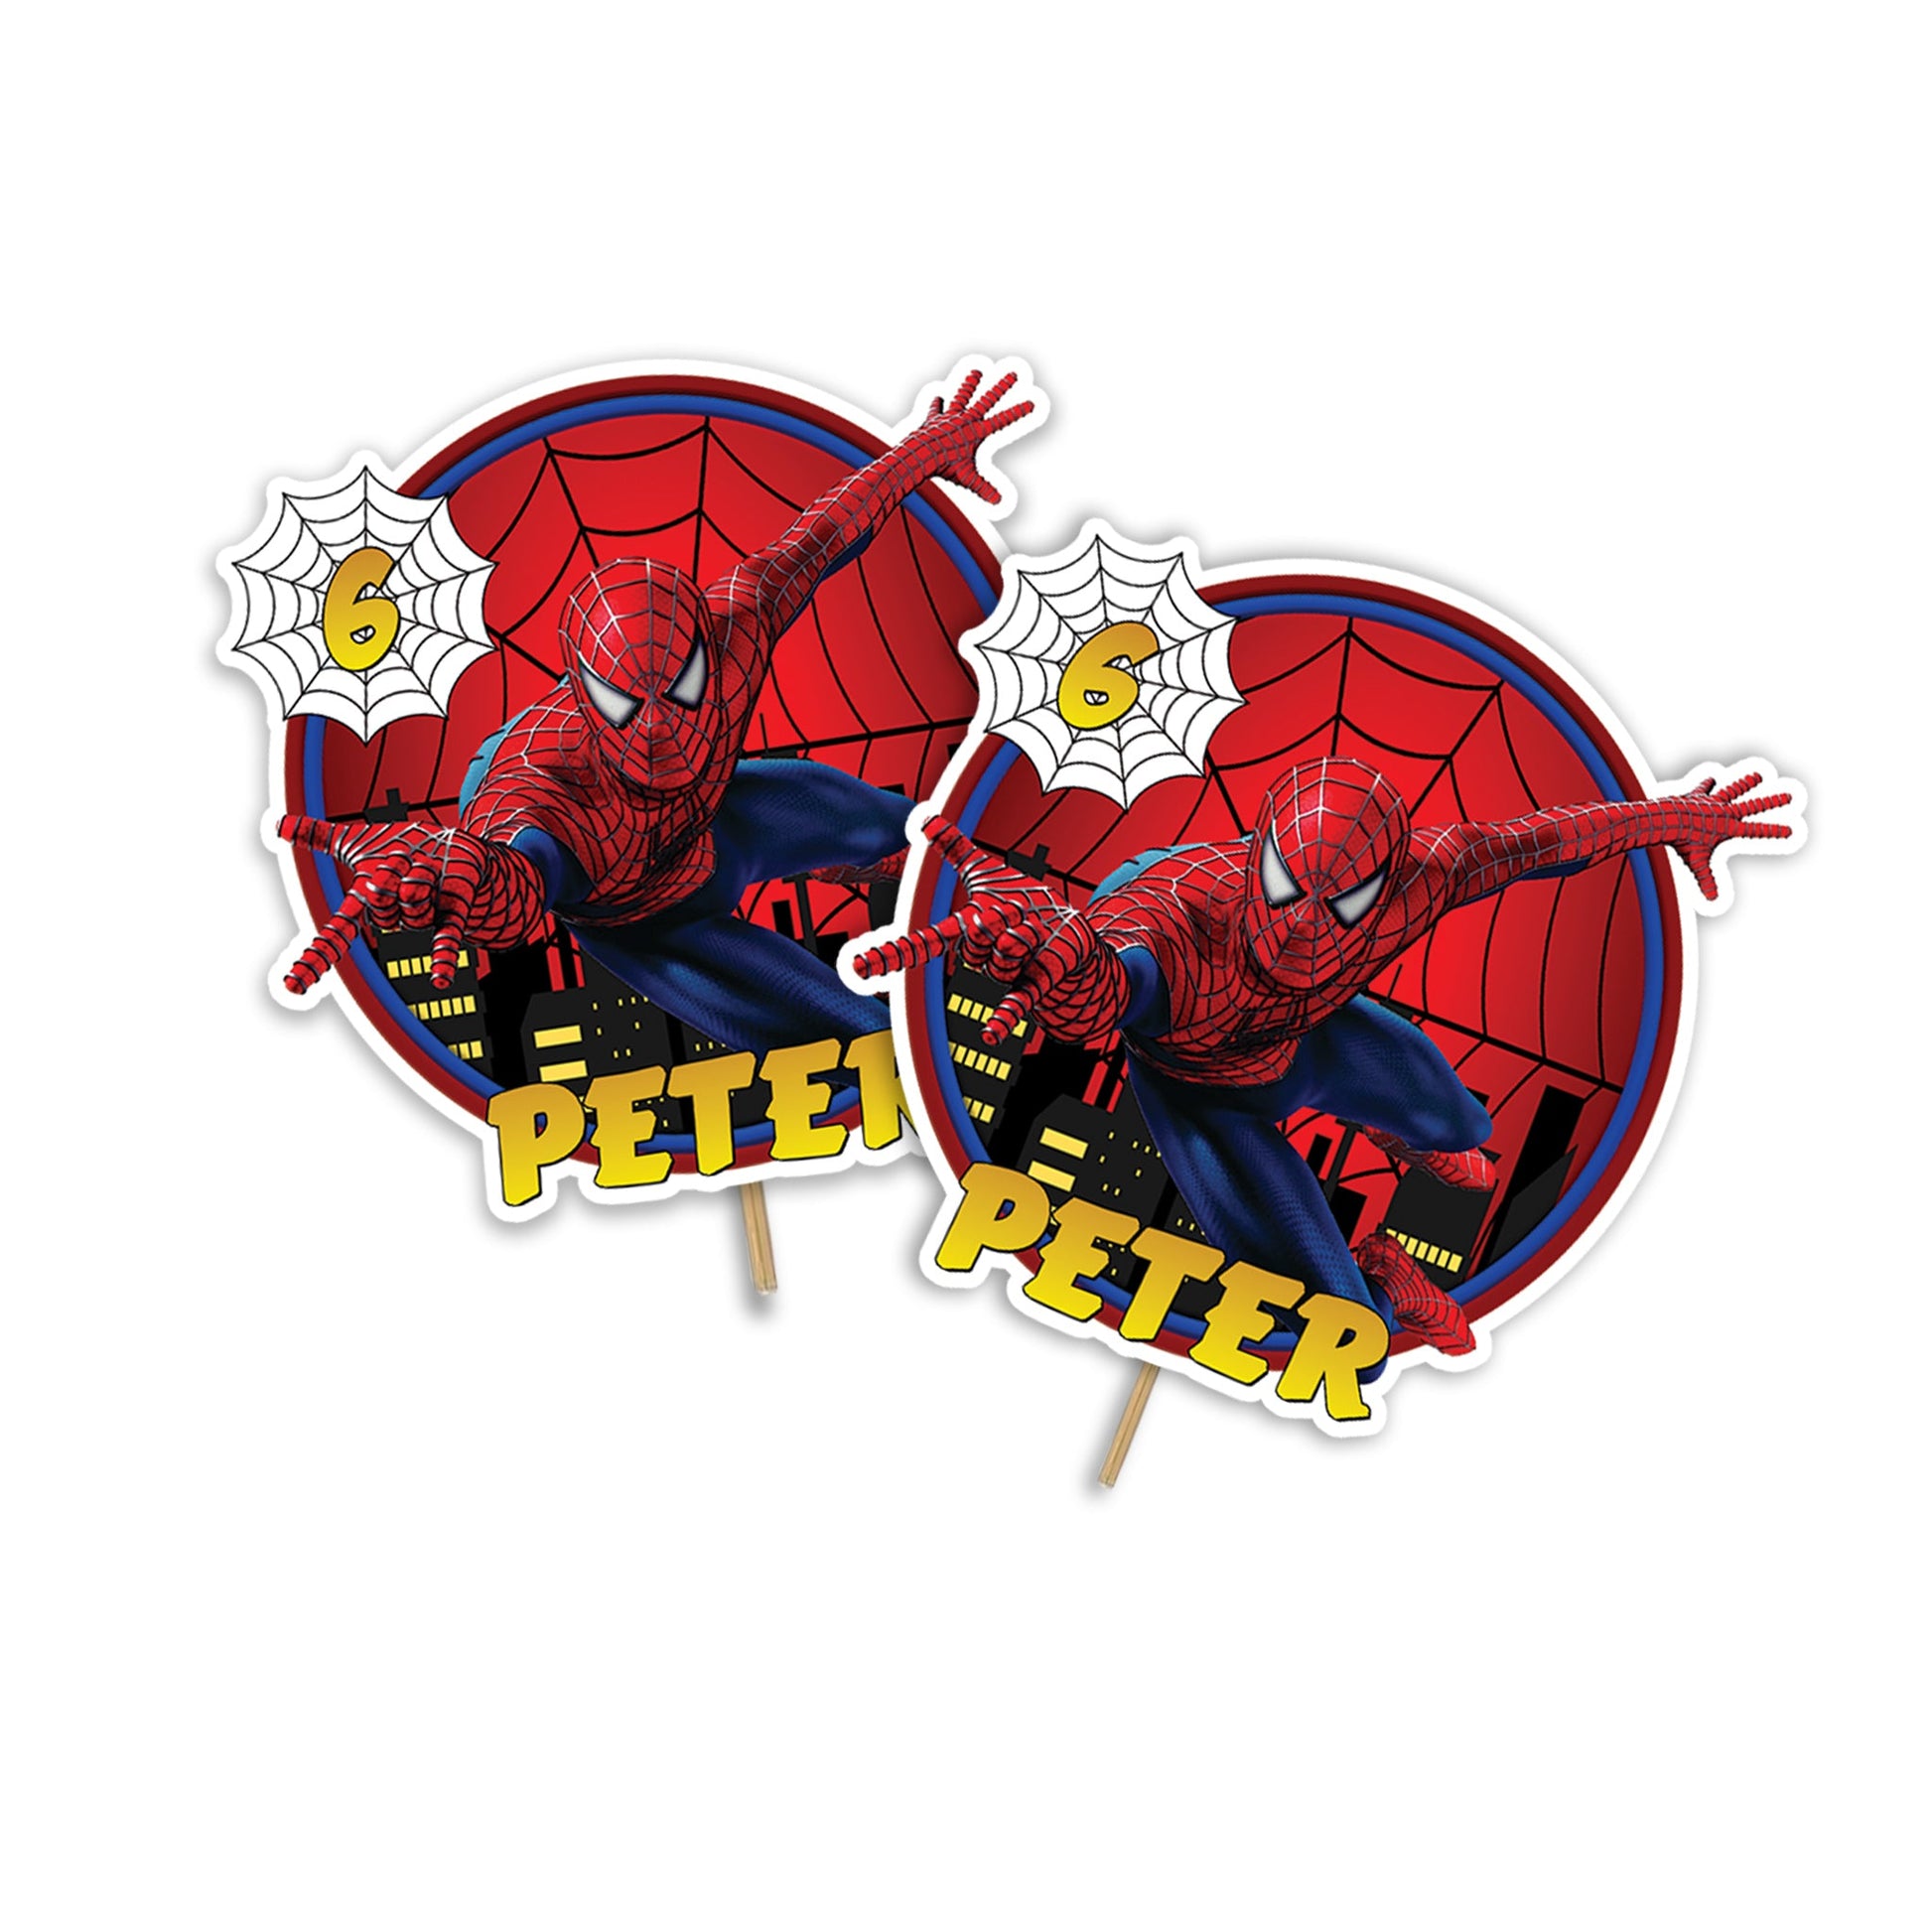 Spiderman themed personalized cake toppers